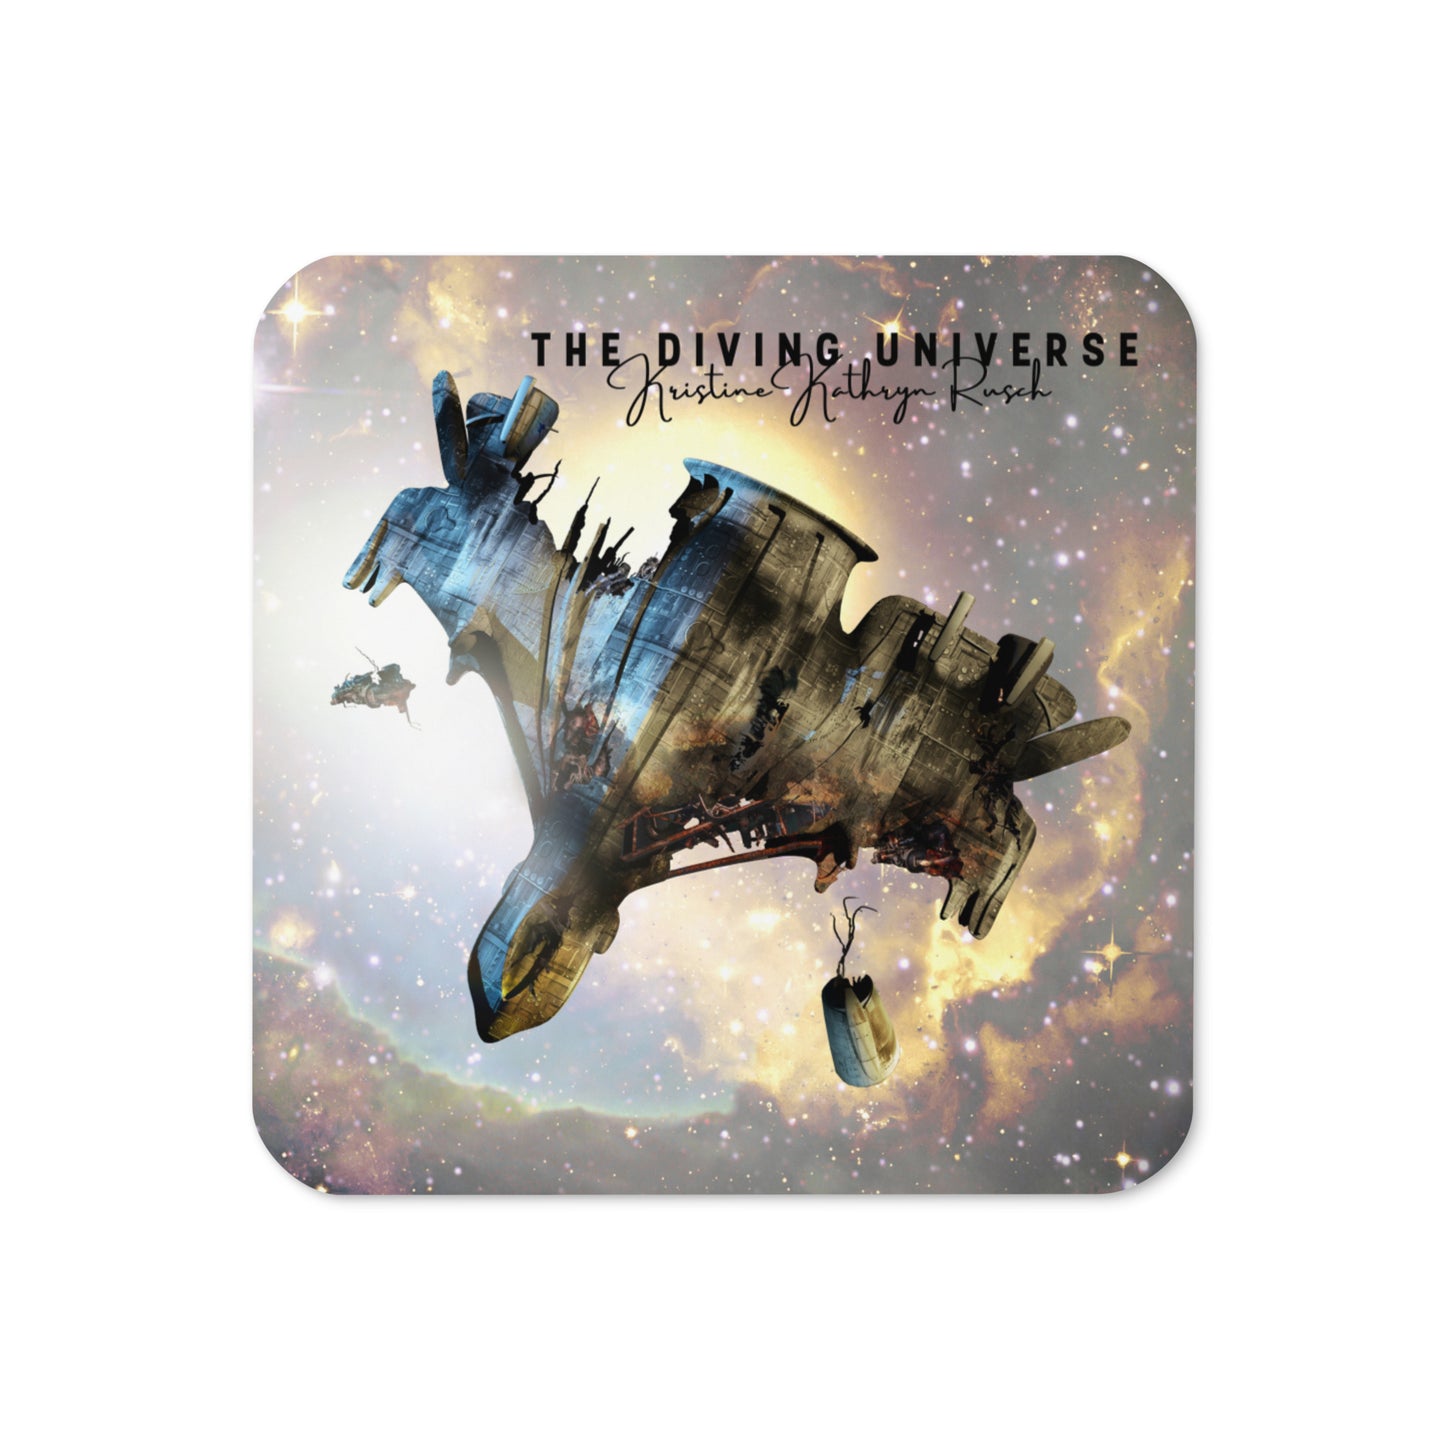 SPACESHIP WRECK Coaster (Cork-Backed) - The Diving Universe by Kristine Kathryn Rusch